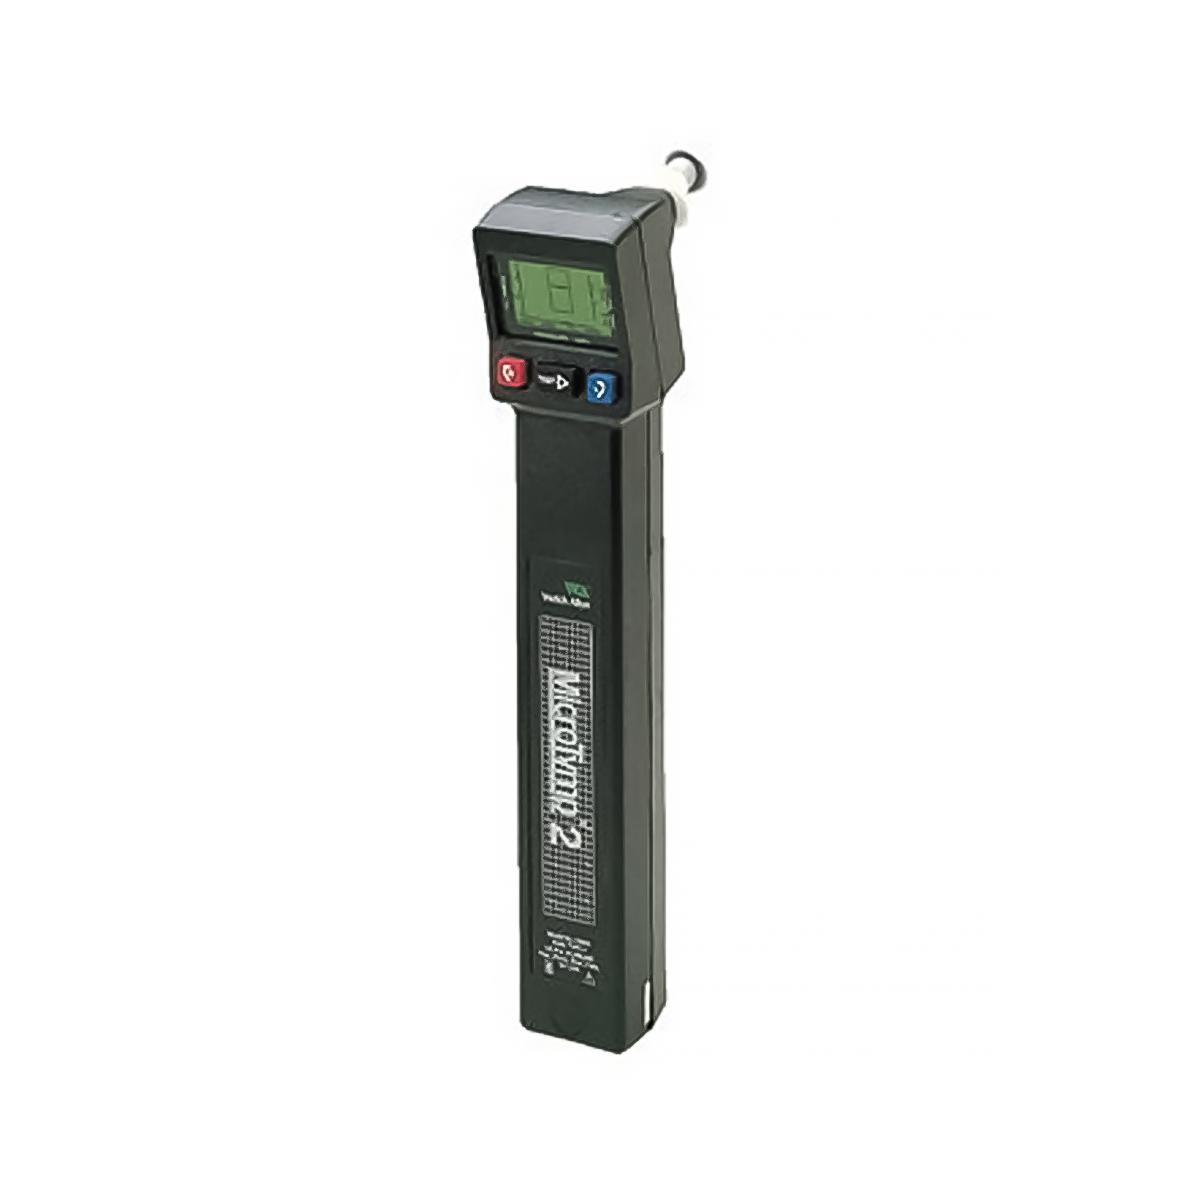 MicroTymp 2 Portable Tympanometric Instrument, 3/4 view